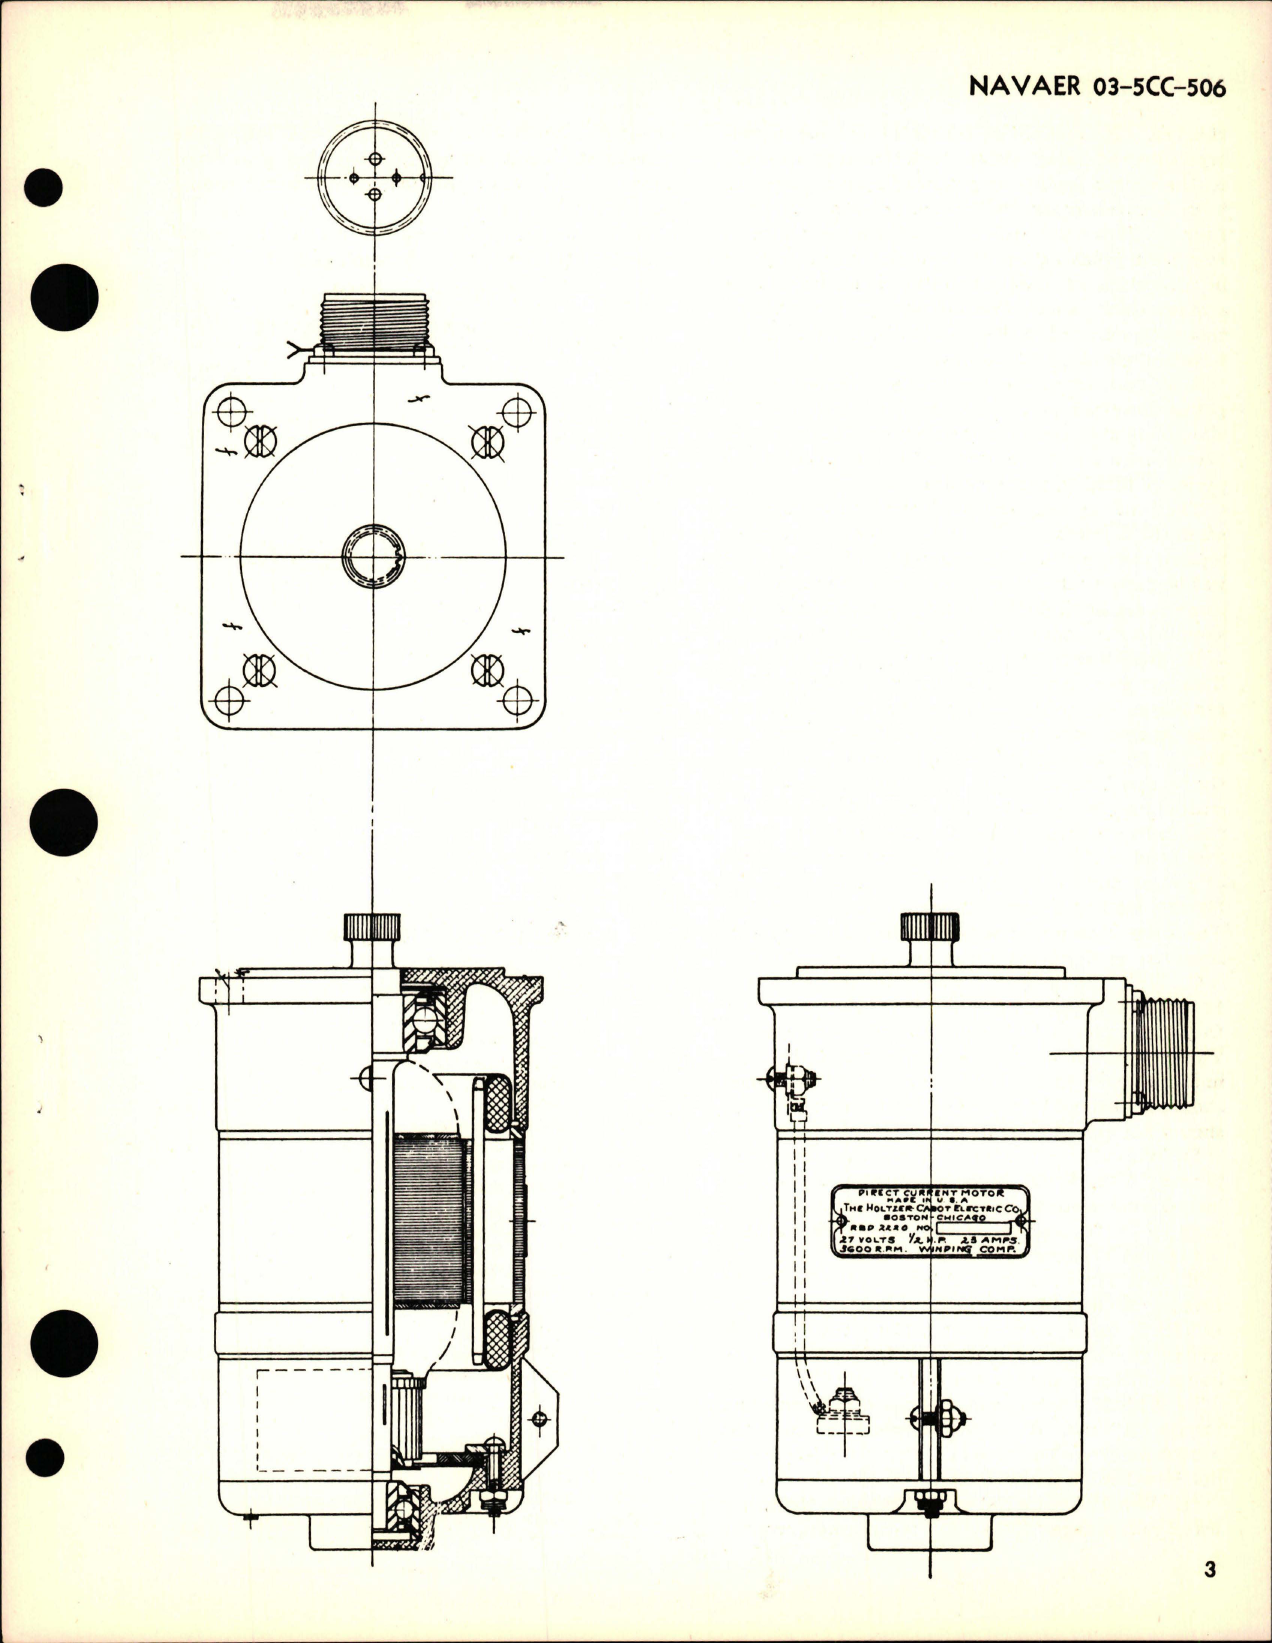 Sample page 5 from AirCorps Library document: Maintenance Instructions for Bomb Bay Actuating Motor - Type RBD 2220, 1/2 HP, 3,600 RPM, 27 Volts D.C.